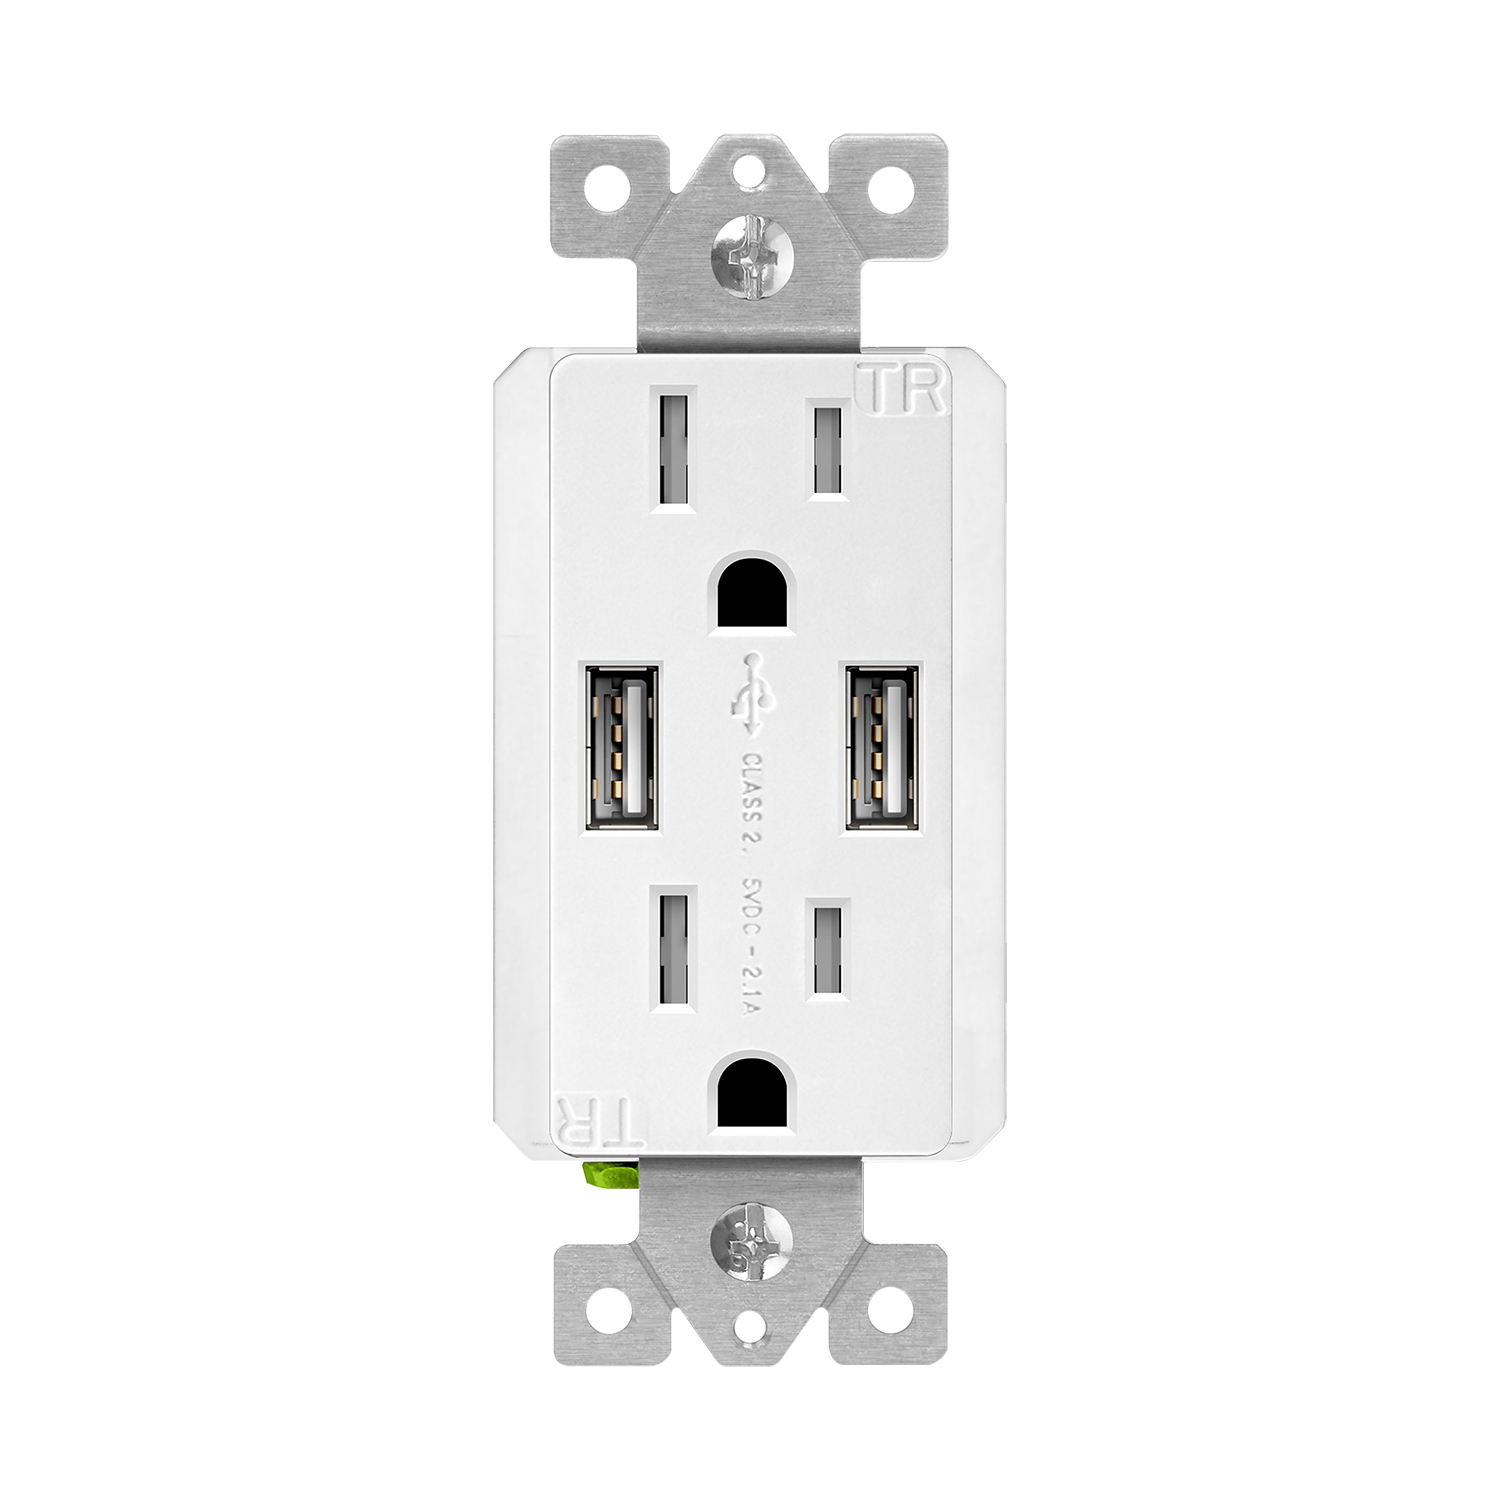 900 Joules Surge Suppressor 15A 125V Receptacles Auto Sensor LED Guide Light TGSP615P68A3 6.3A USB Ports White TOPGREENER 6-Outlet Wall Mount Surge Protector Wall Tap 